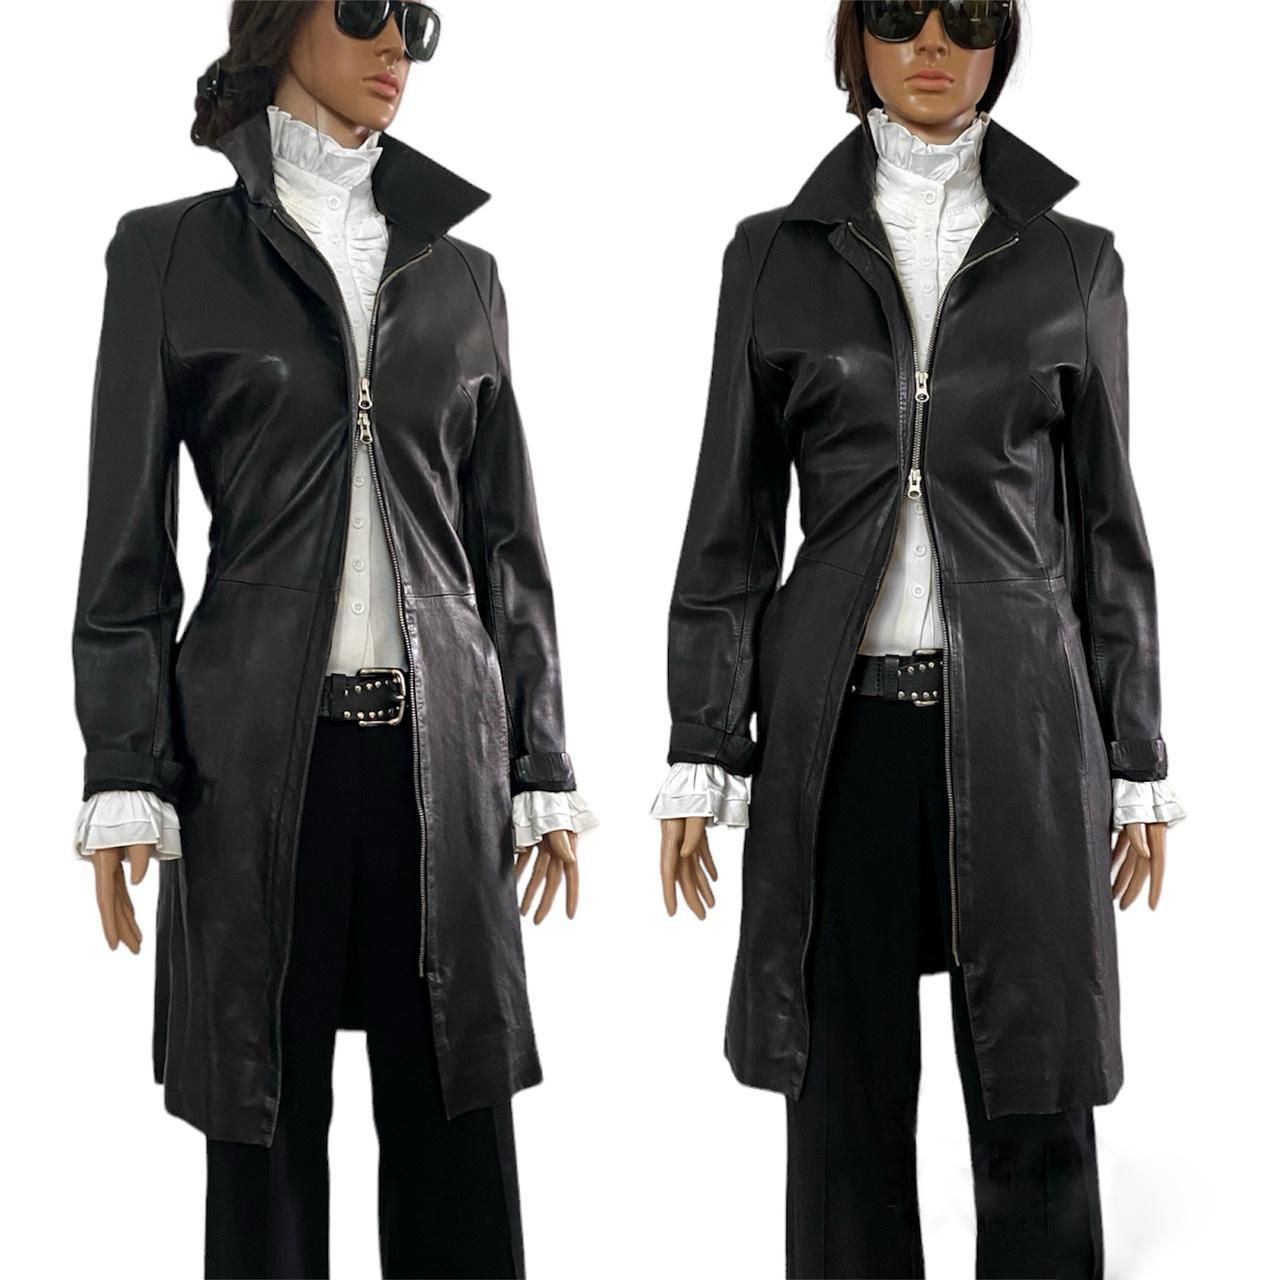 Taurus Firenze leather trench coat/jacket , This...